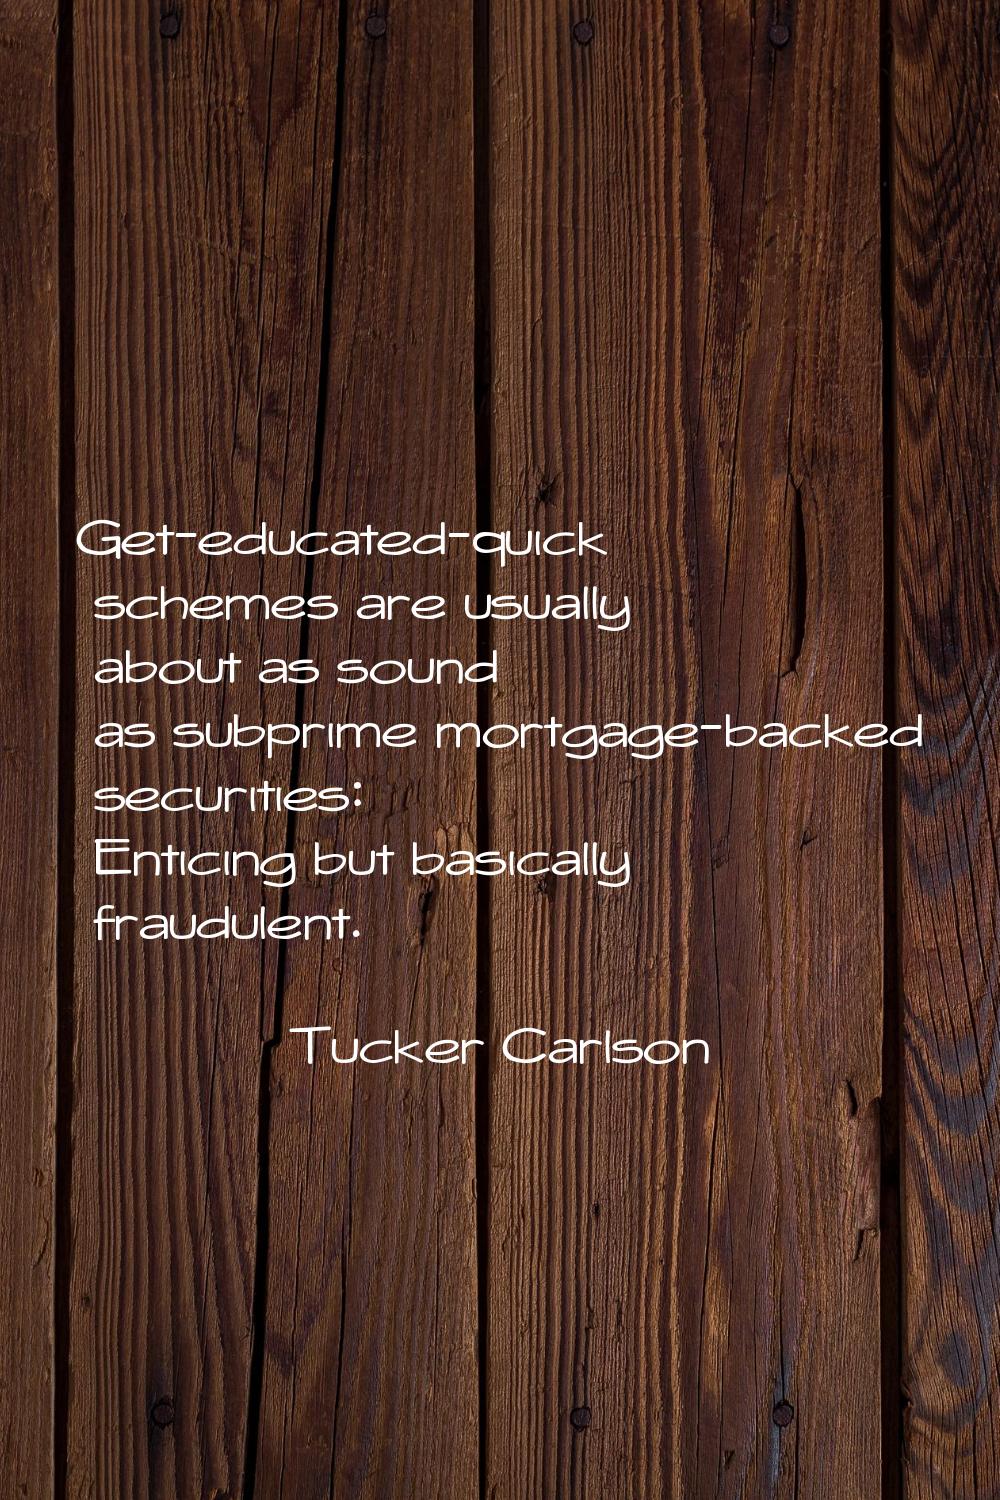 Get-educated-quick schemes are usually about as sound as subprime mortgage-backed securities: Entic